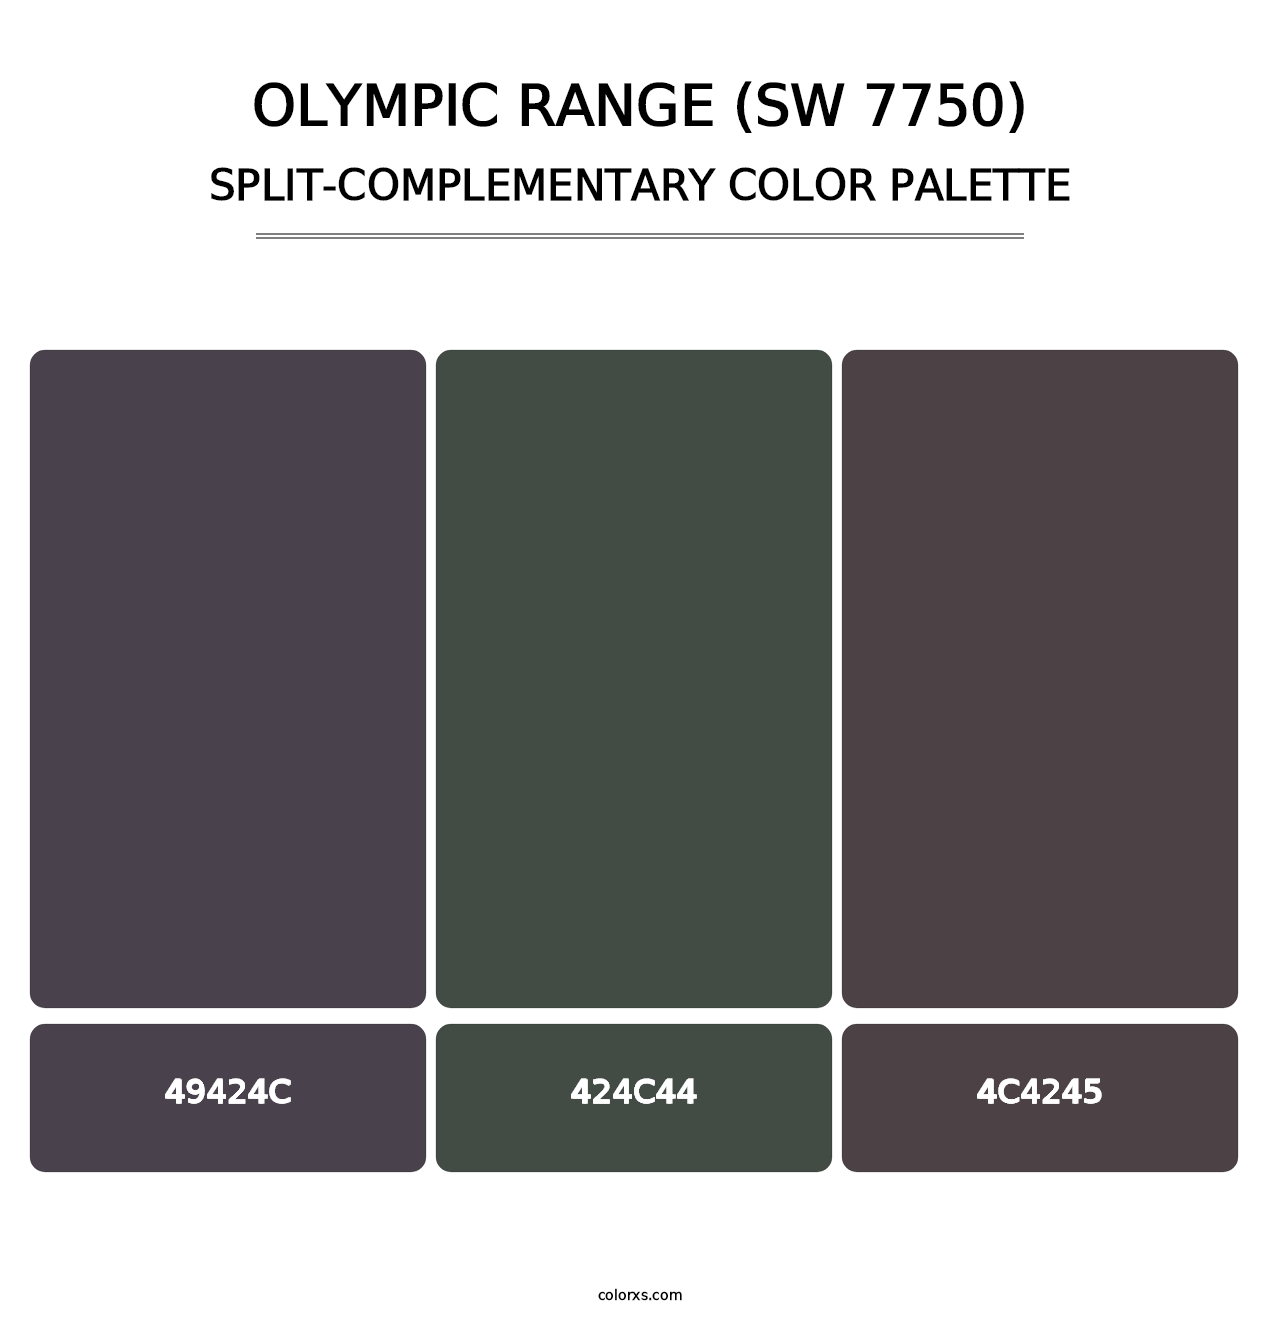 Olympic Range (SW 7750) - Split-Complementary Color Palette